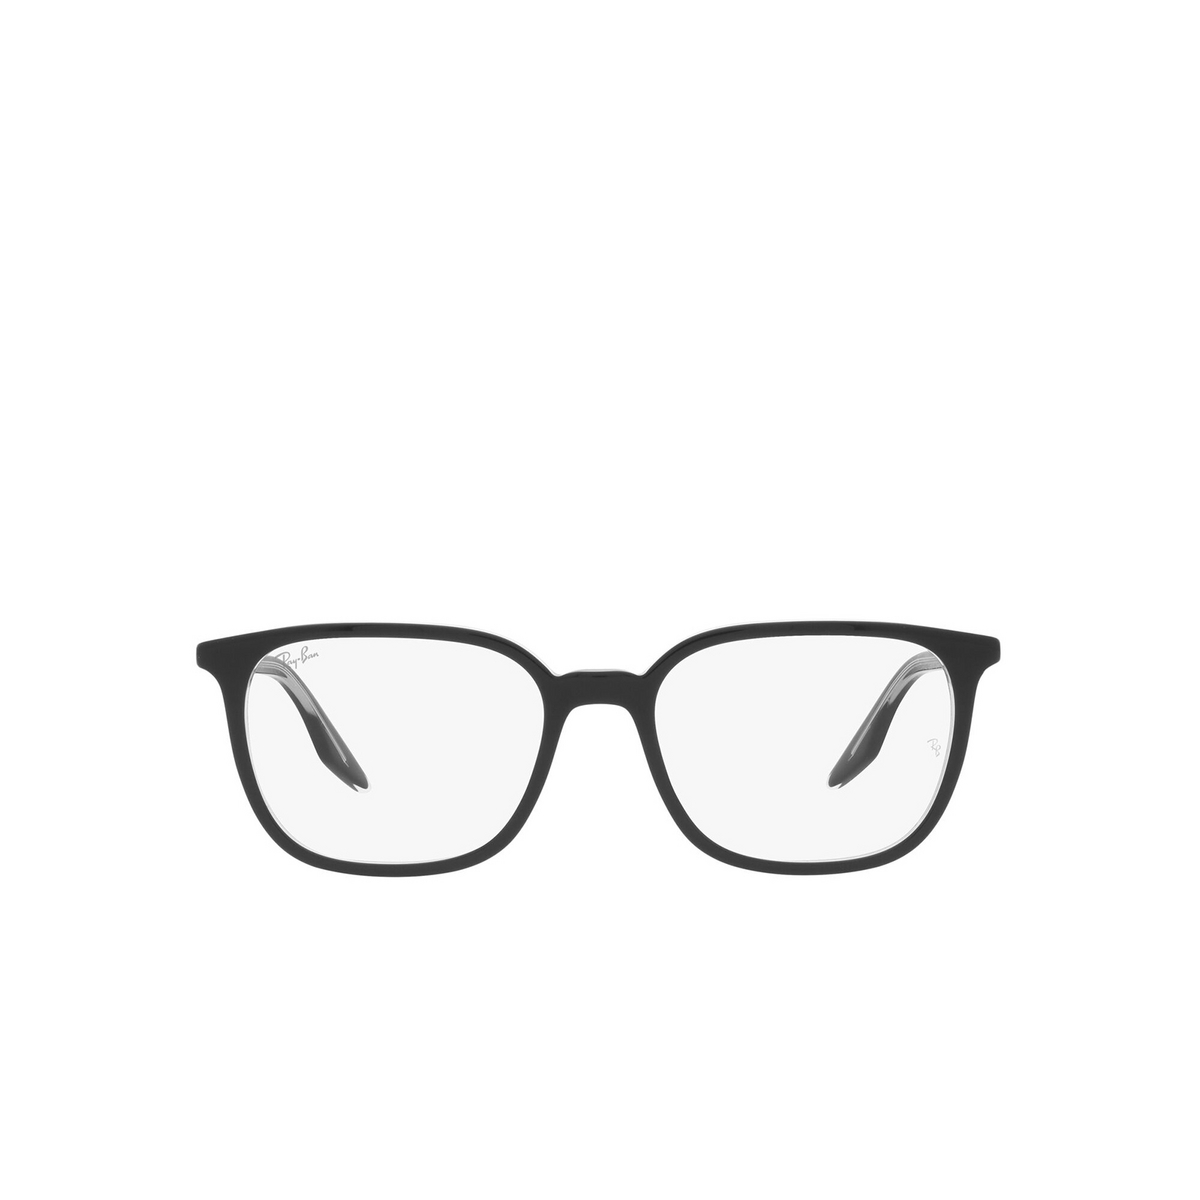 Ray-Ban RX5406 Eyeglasses 2034 Black On Transparent - front view